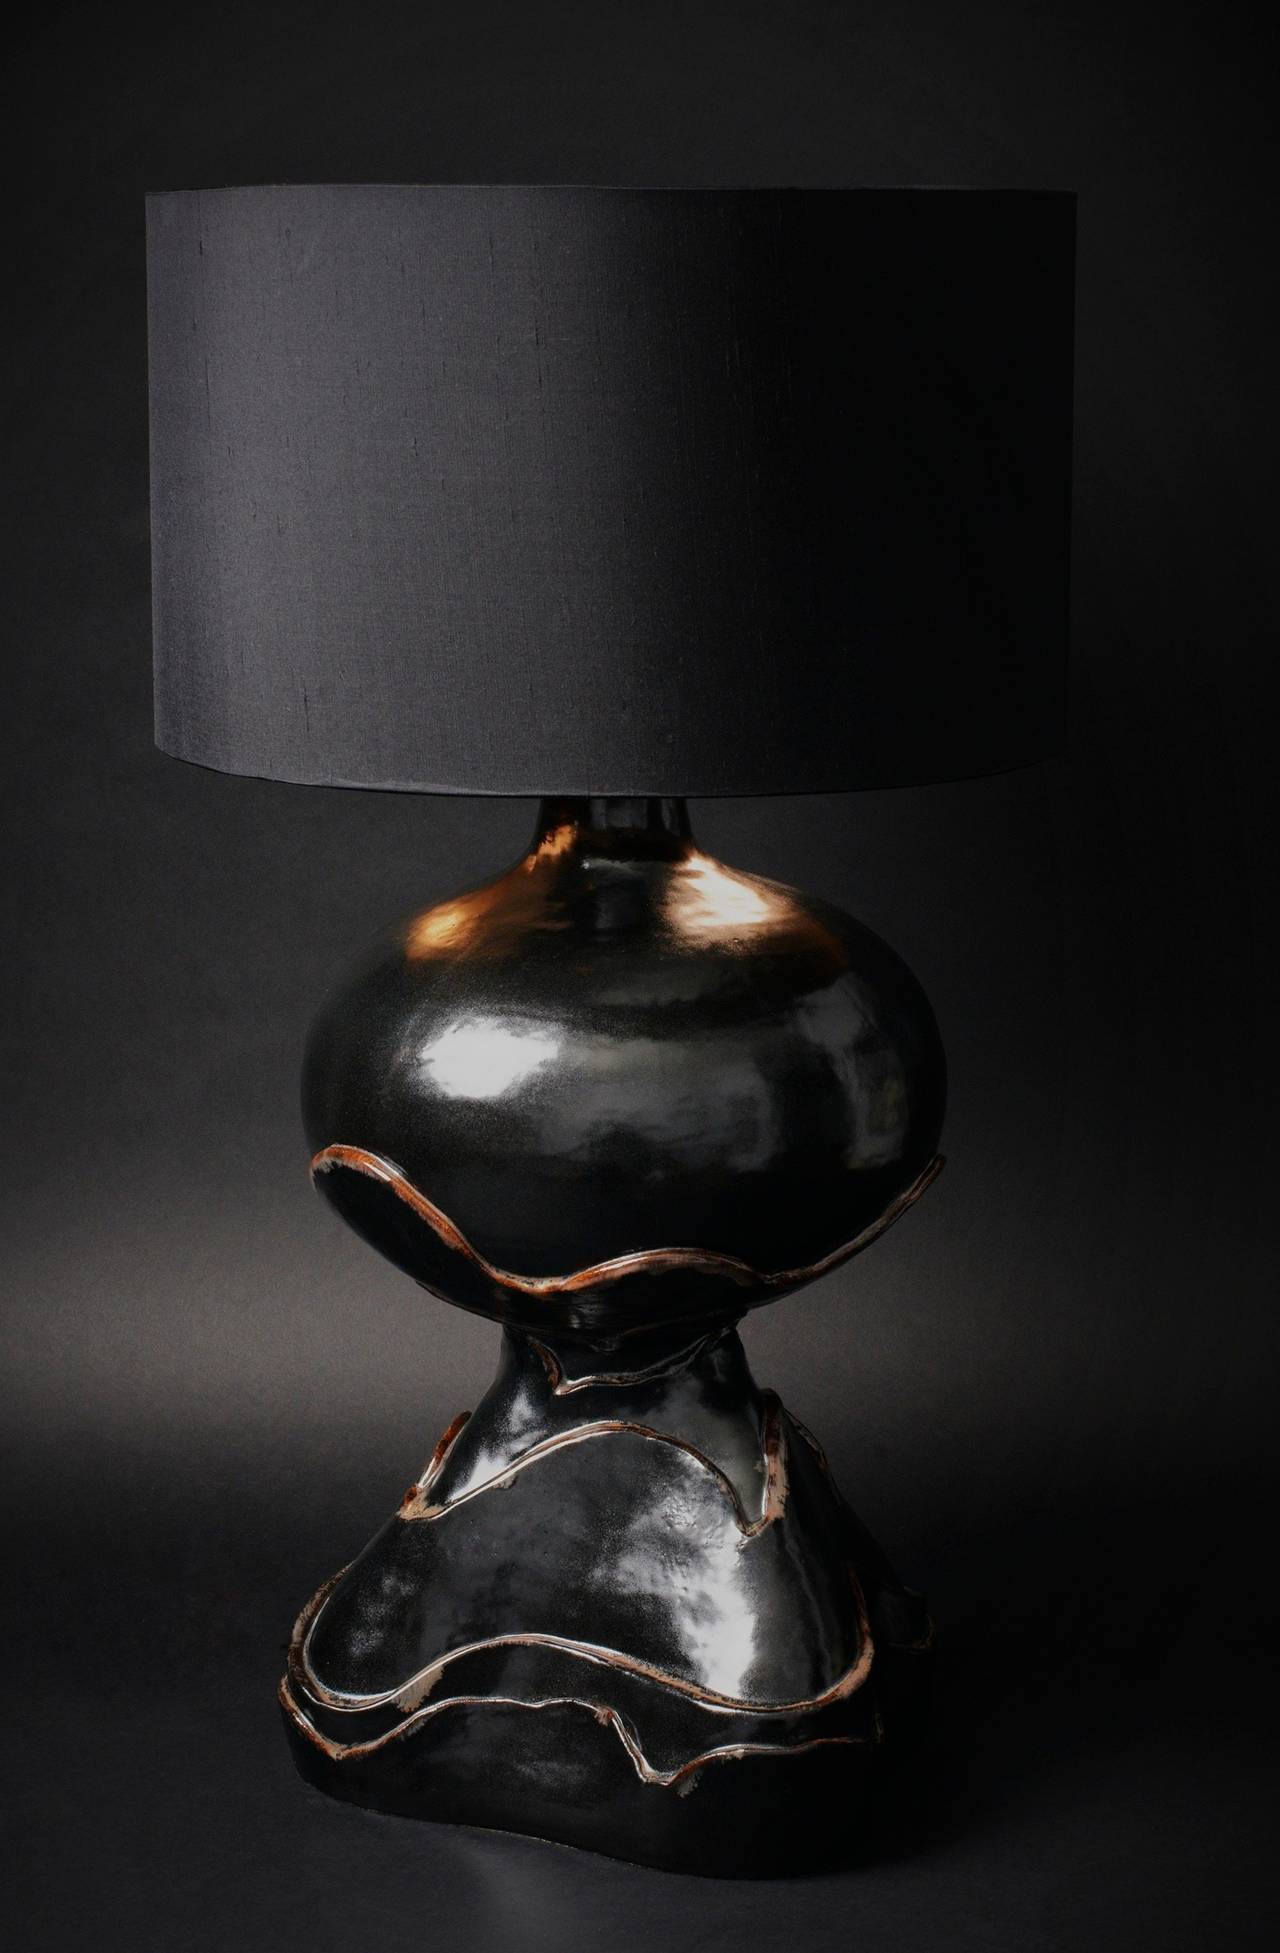 Large free shape black enameled sandstone table lamp. 2014 creation of the French ceramic artists DALO.

Daniel & Loic (DALO) are designing together since 2007 original ceramic pieces. Inspired by the second part of the 20th Century French